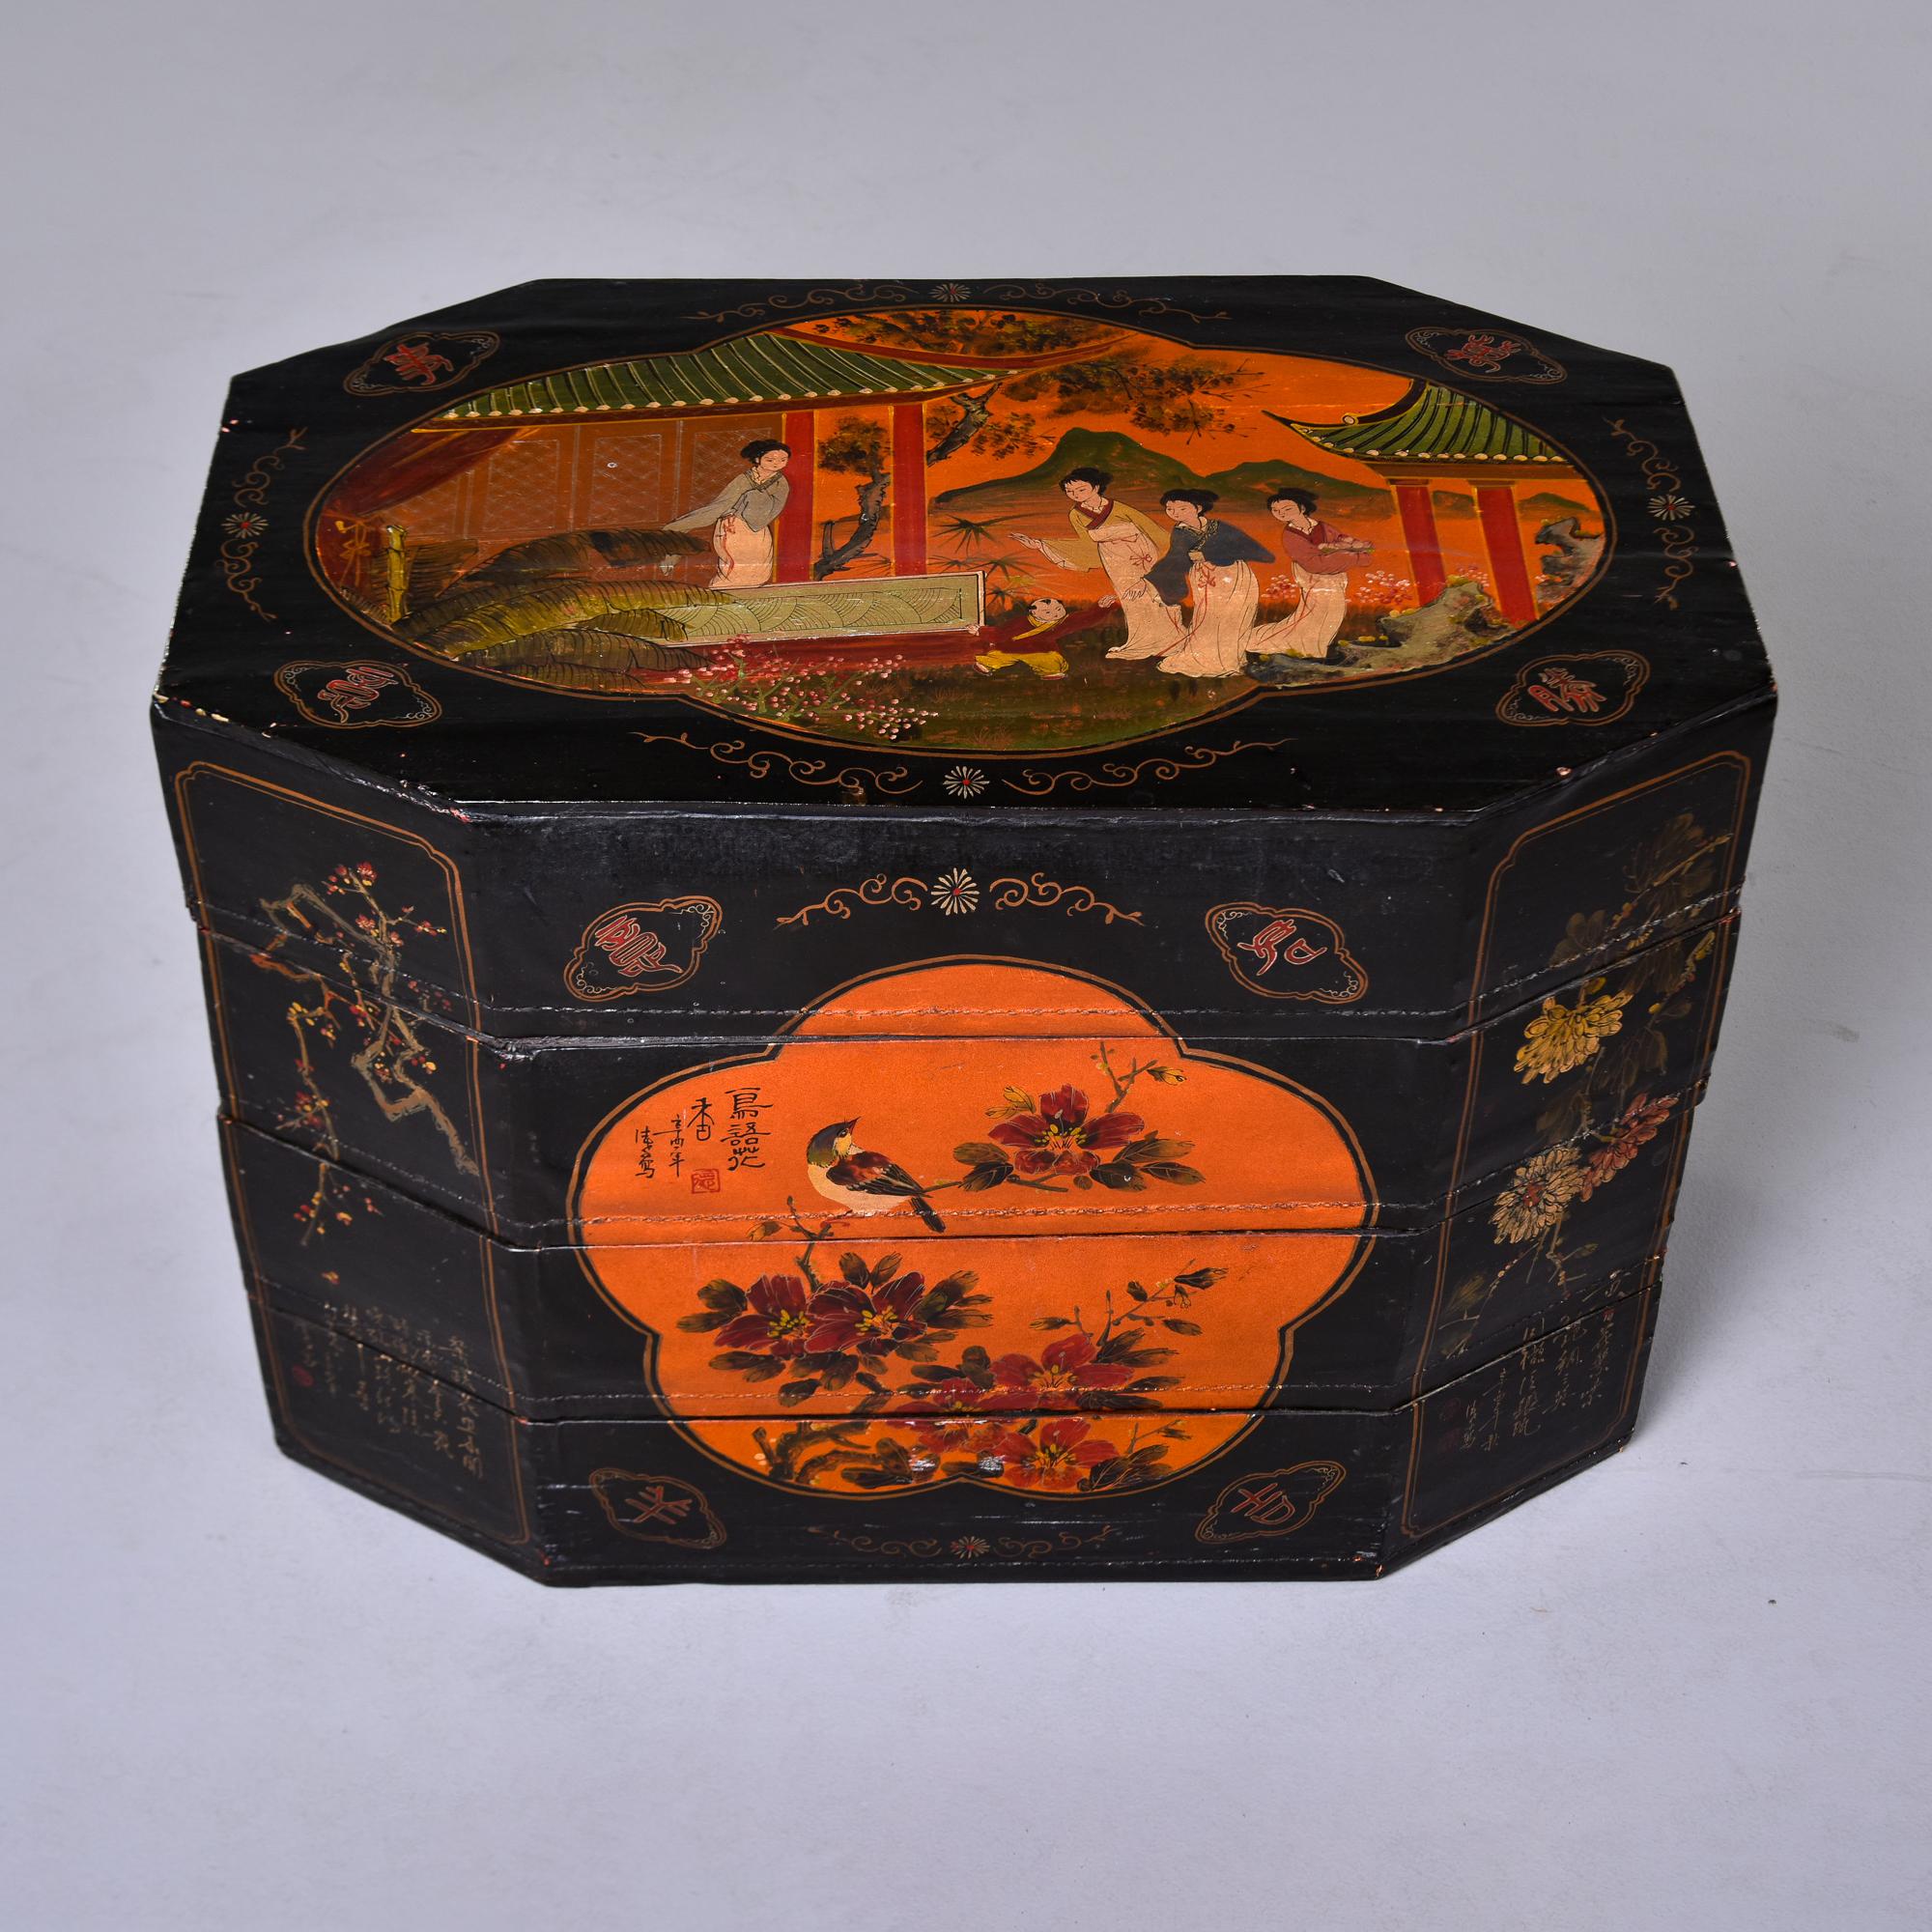 Circa 1940s Chinese export eight sided, four section stacked box. Thin, lightweight wood-constructed box covered in canvas, hand-painted on top, front, back and sides and sealed with lacquer or varnish. Black with gold and red/orange traditional